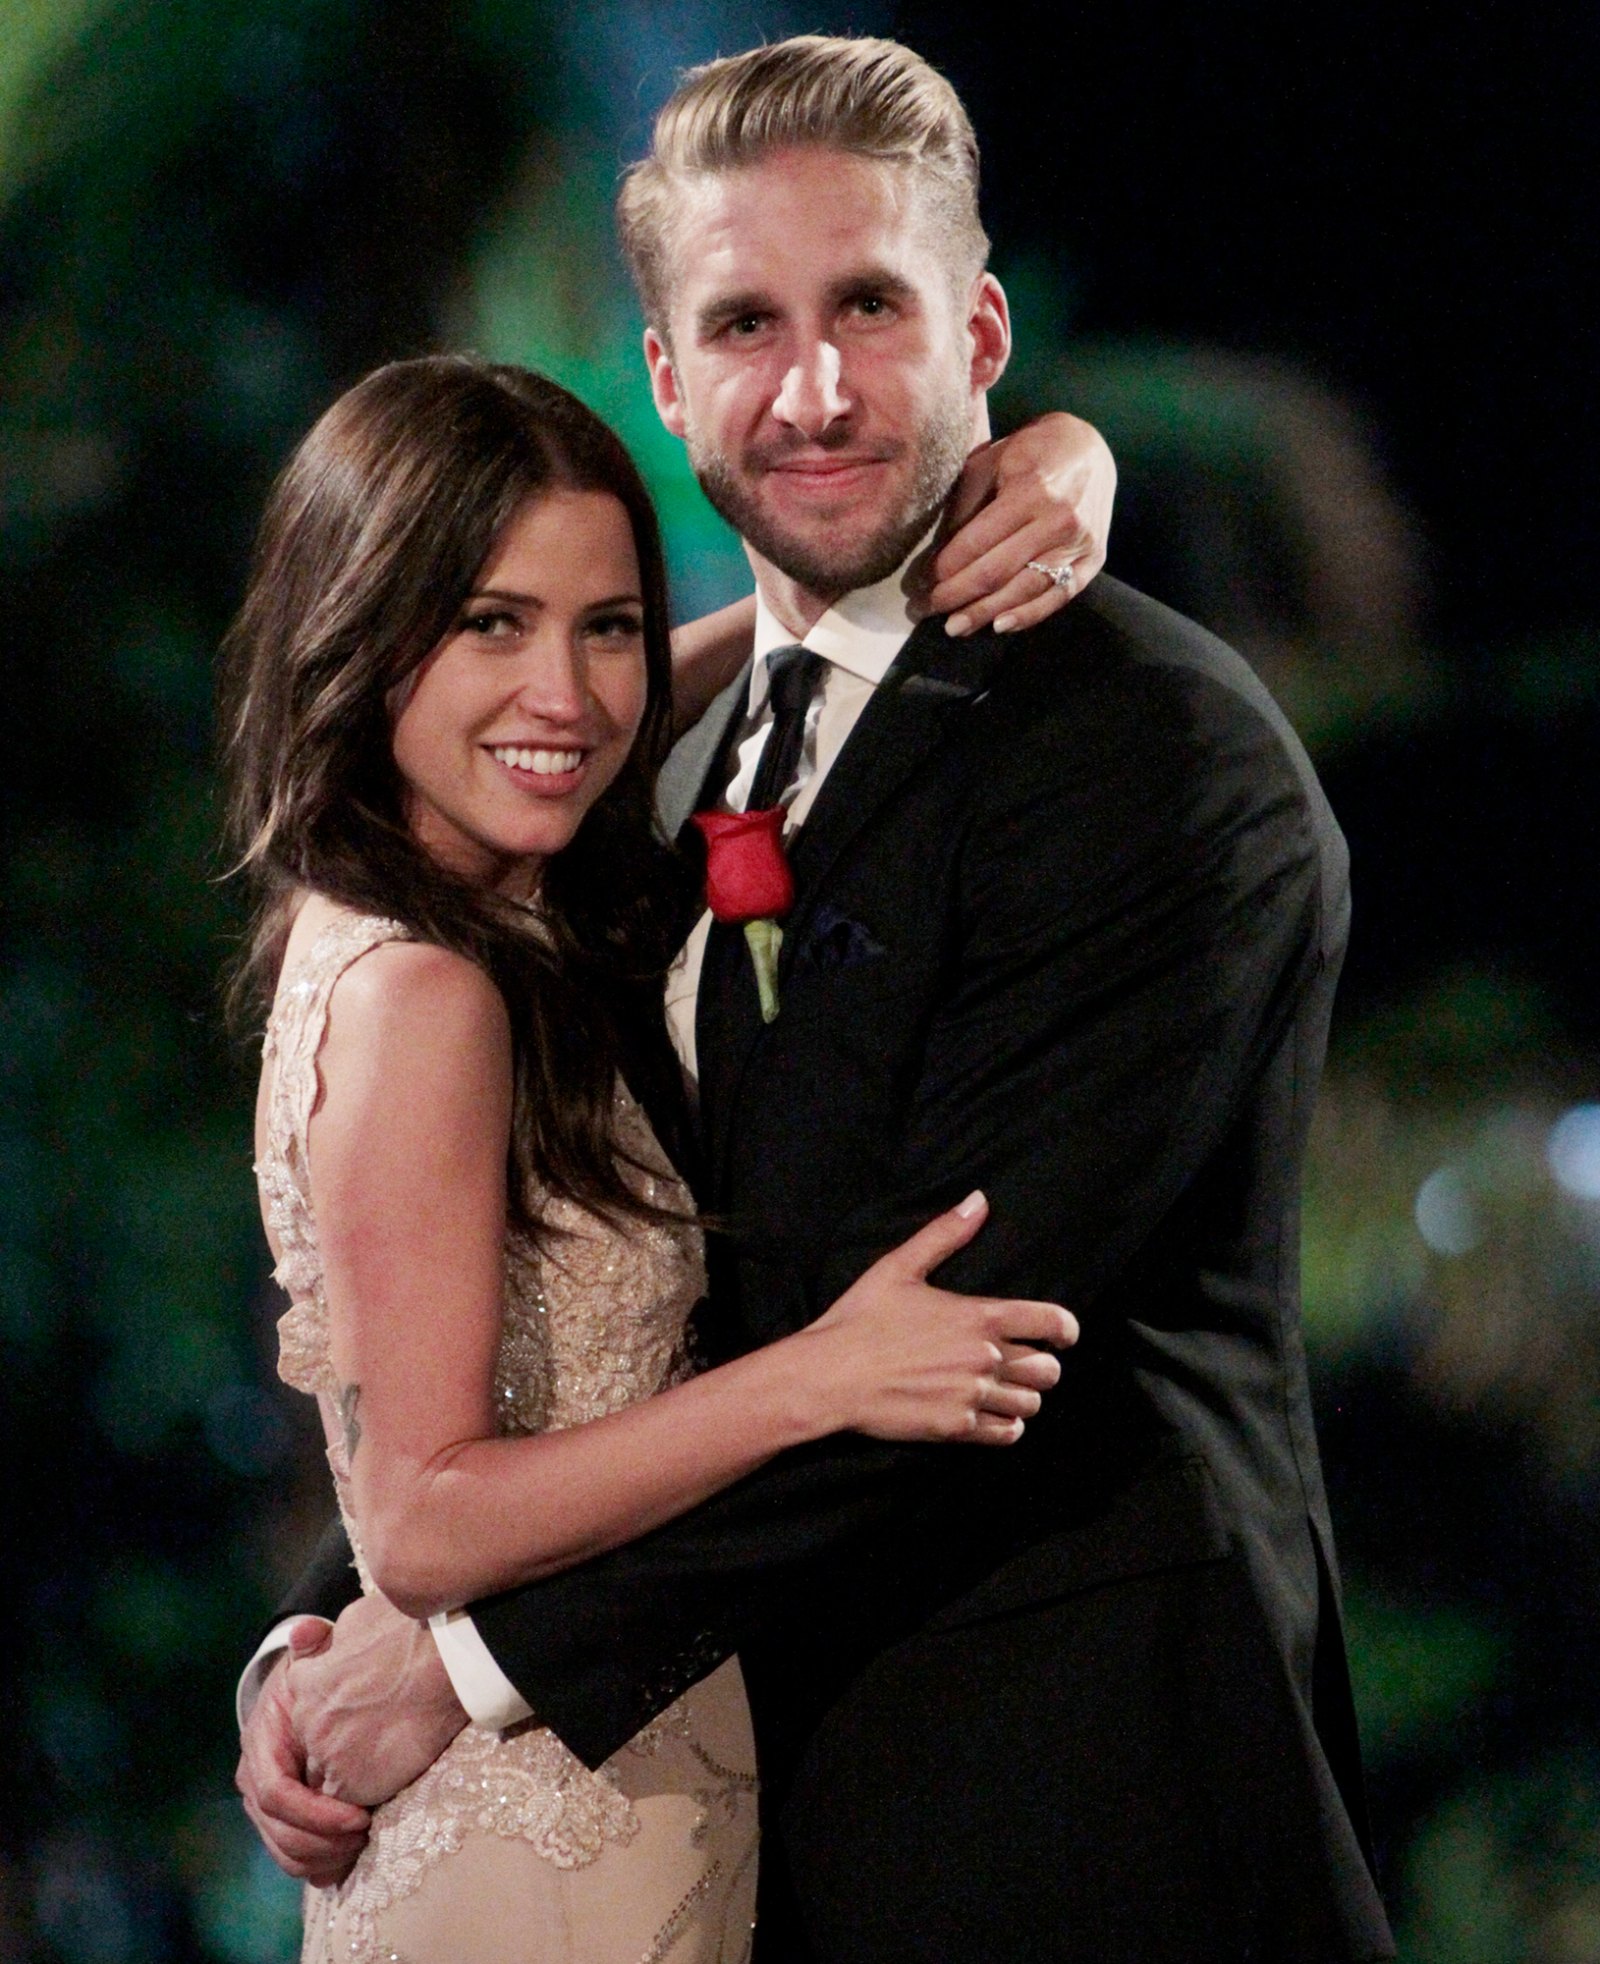 Kaitlyn Bristowe and Shawn Booths Proposal Left Out of Bachelor Greatest Seasons